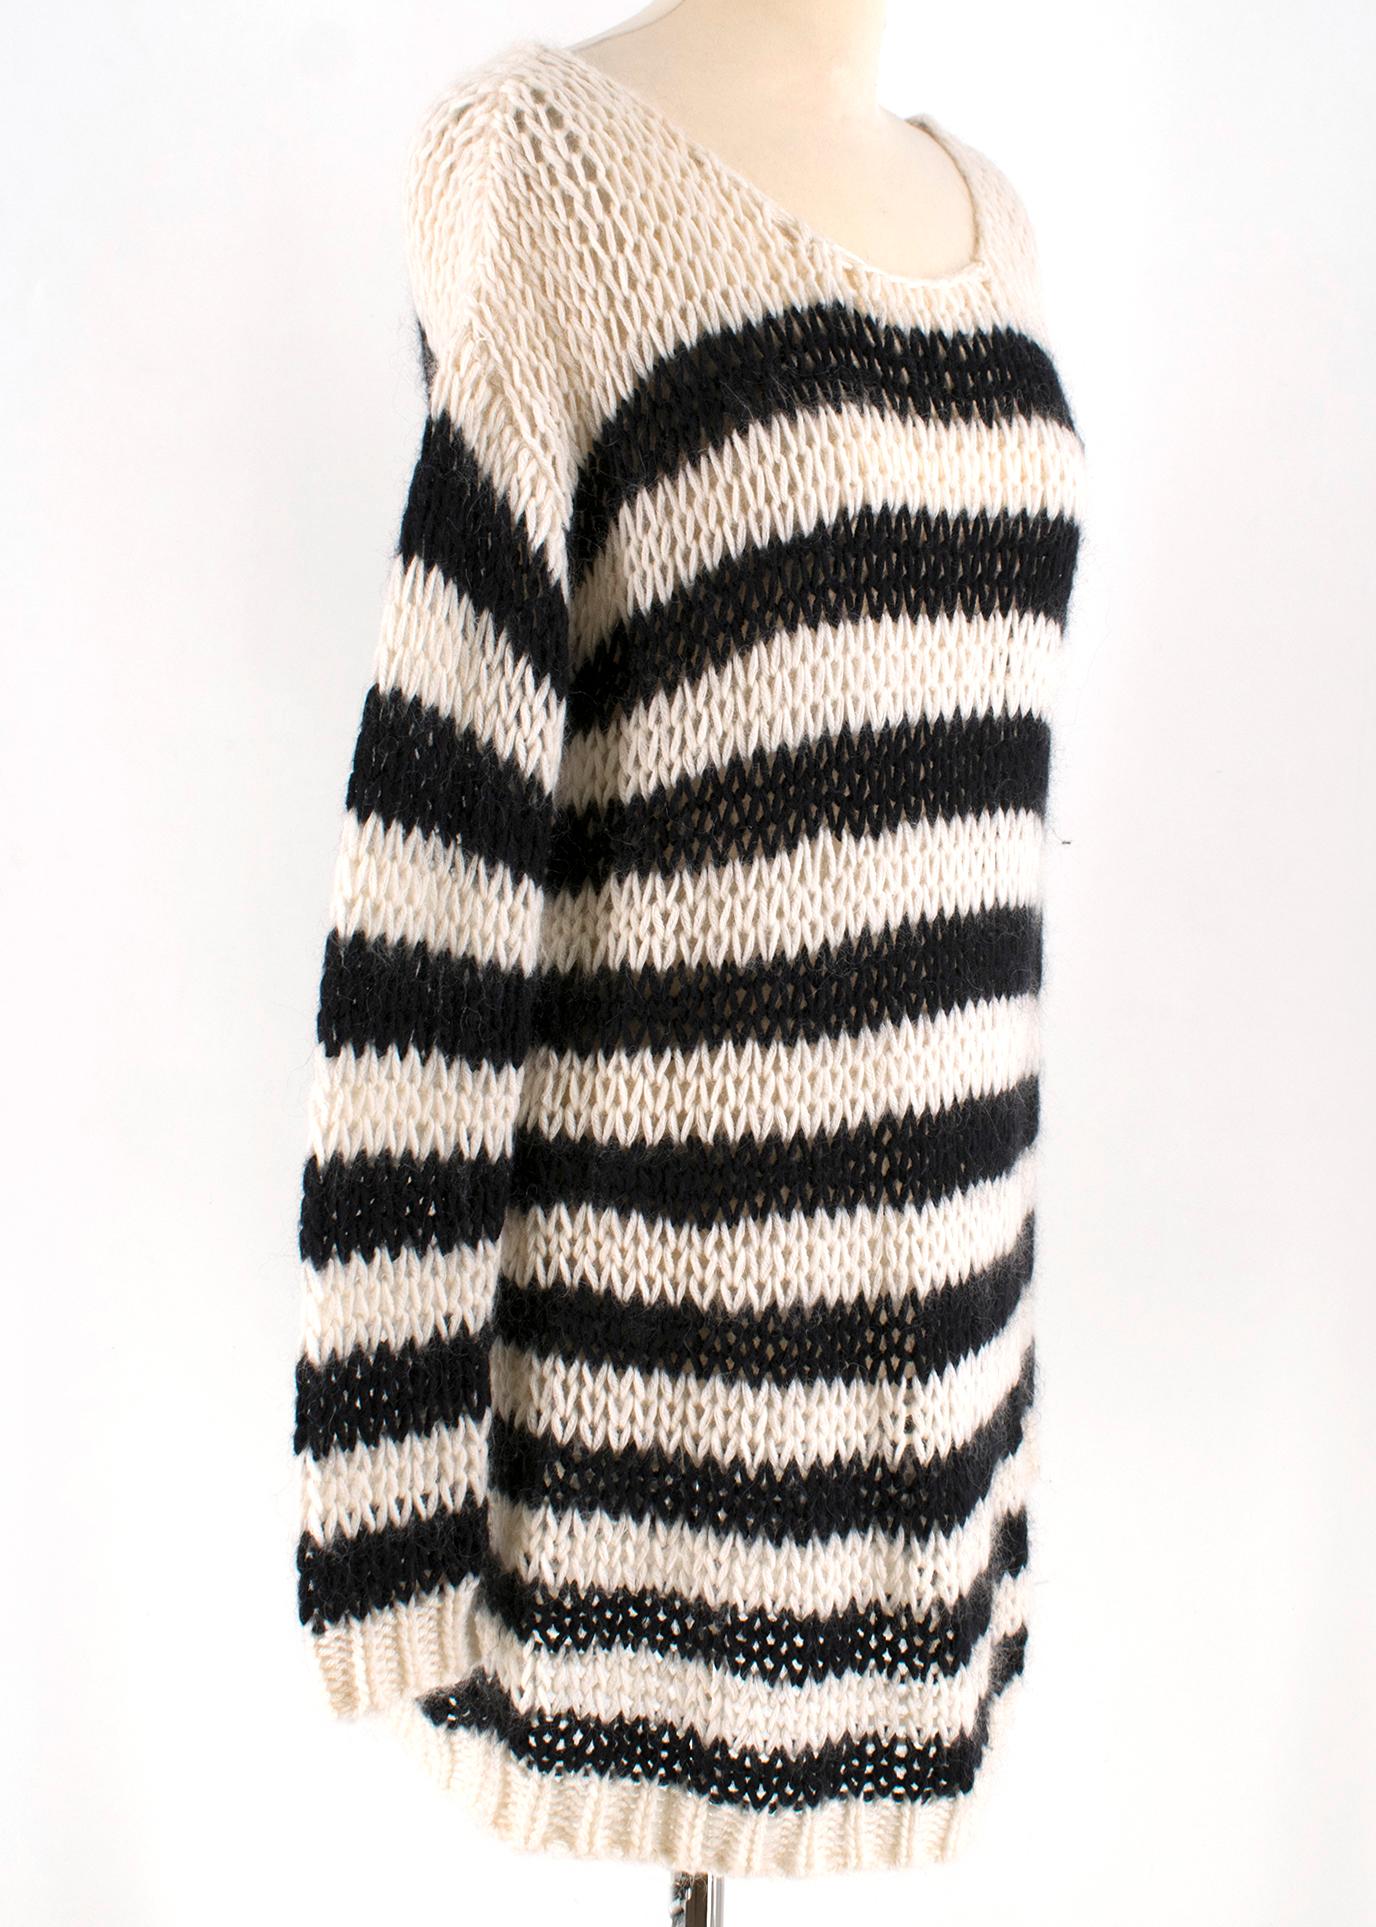 Saint Laurent Wool Oversize Striped Sweater

Round neck
Oversize fit
open knit 

Please note, these items are pre-owned and may show some signs of storage, even when unworn and unused. This is reflected within the significantly reduced price. Please